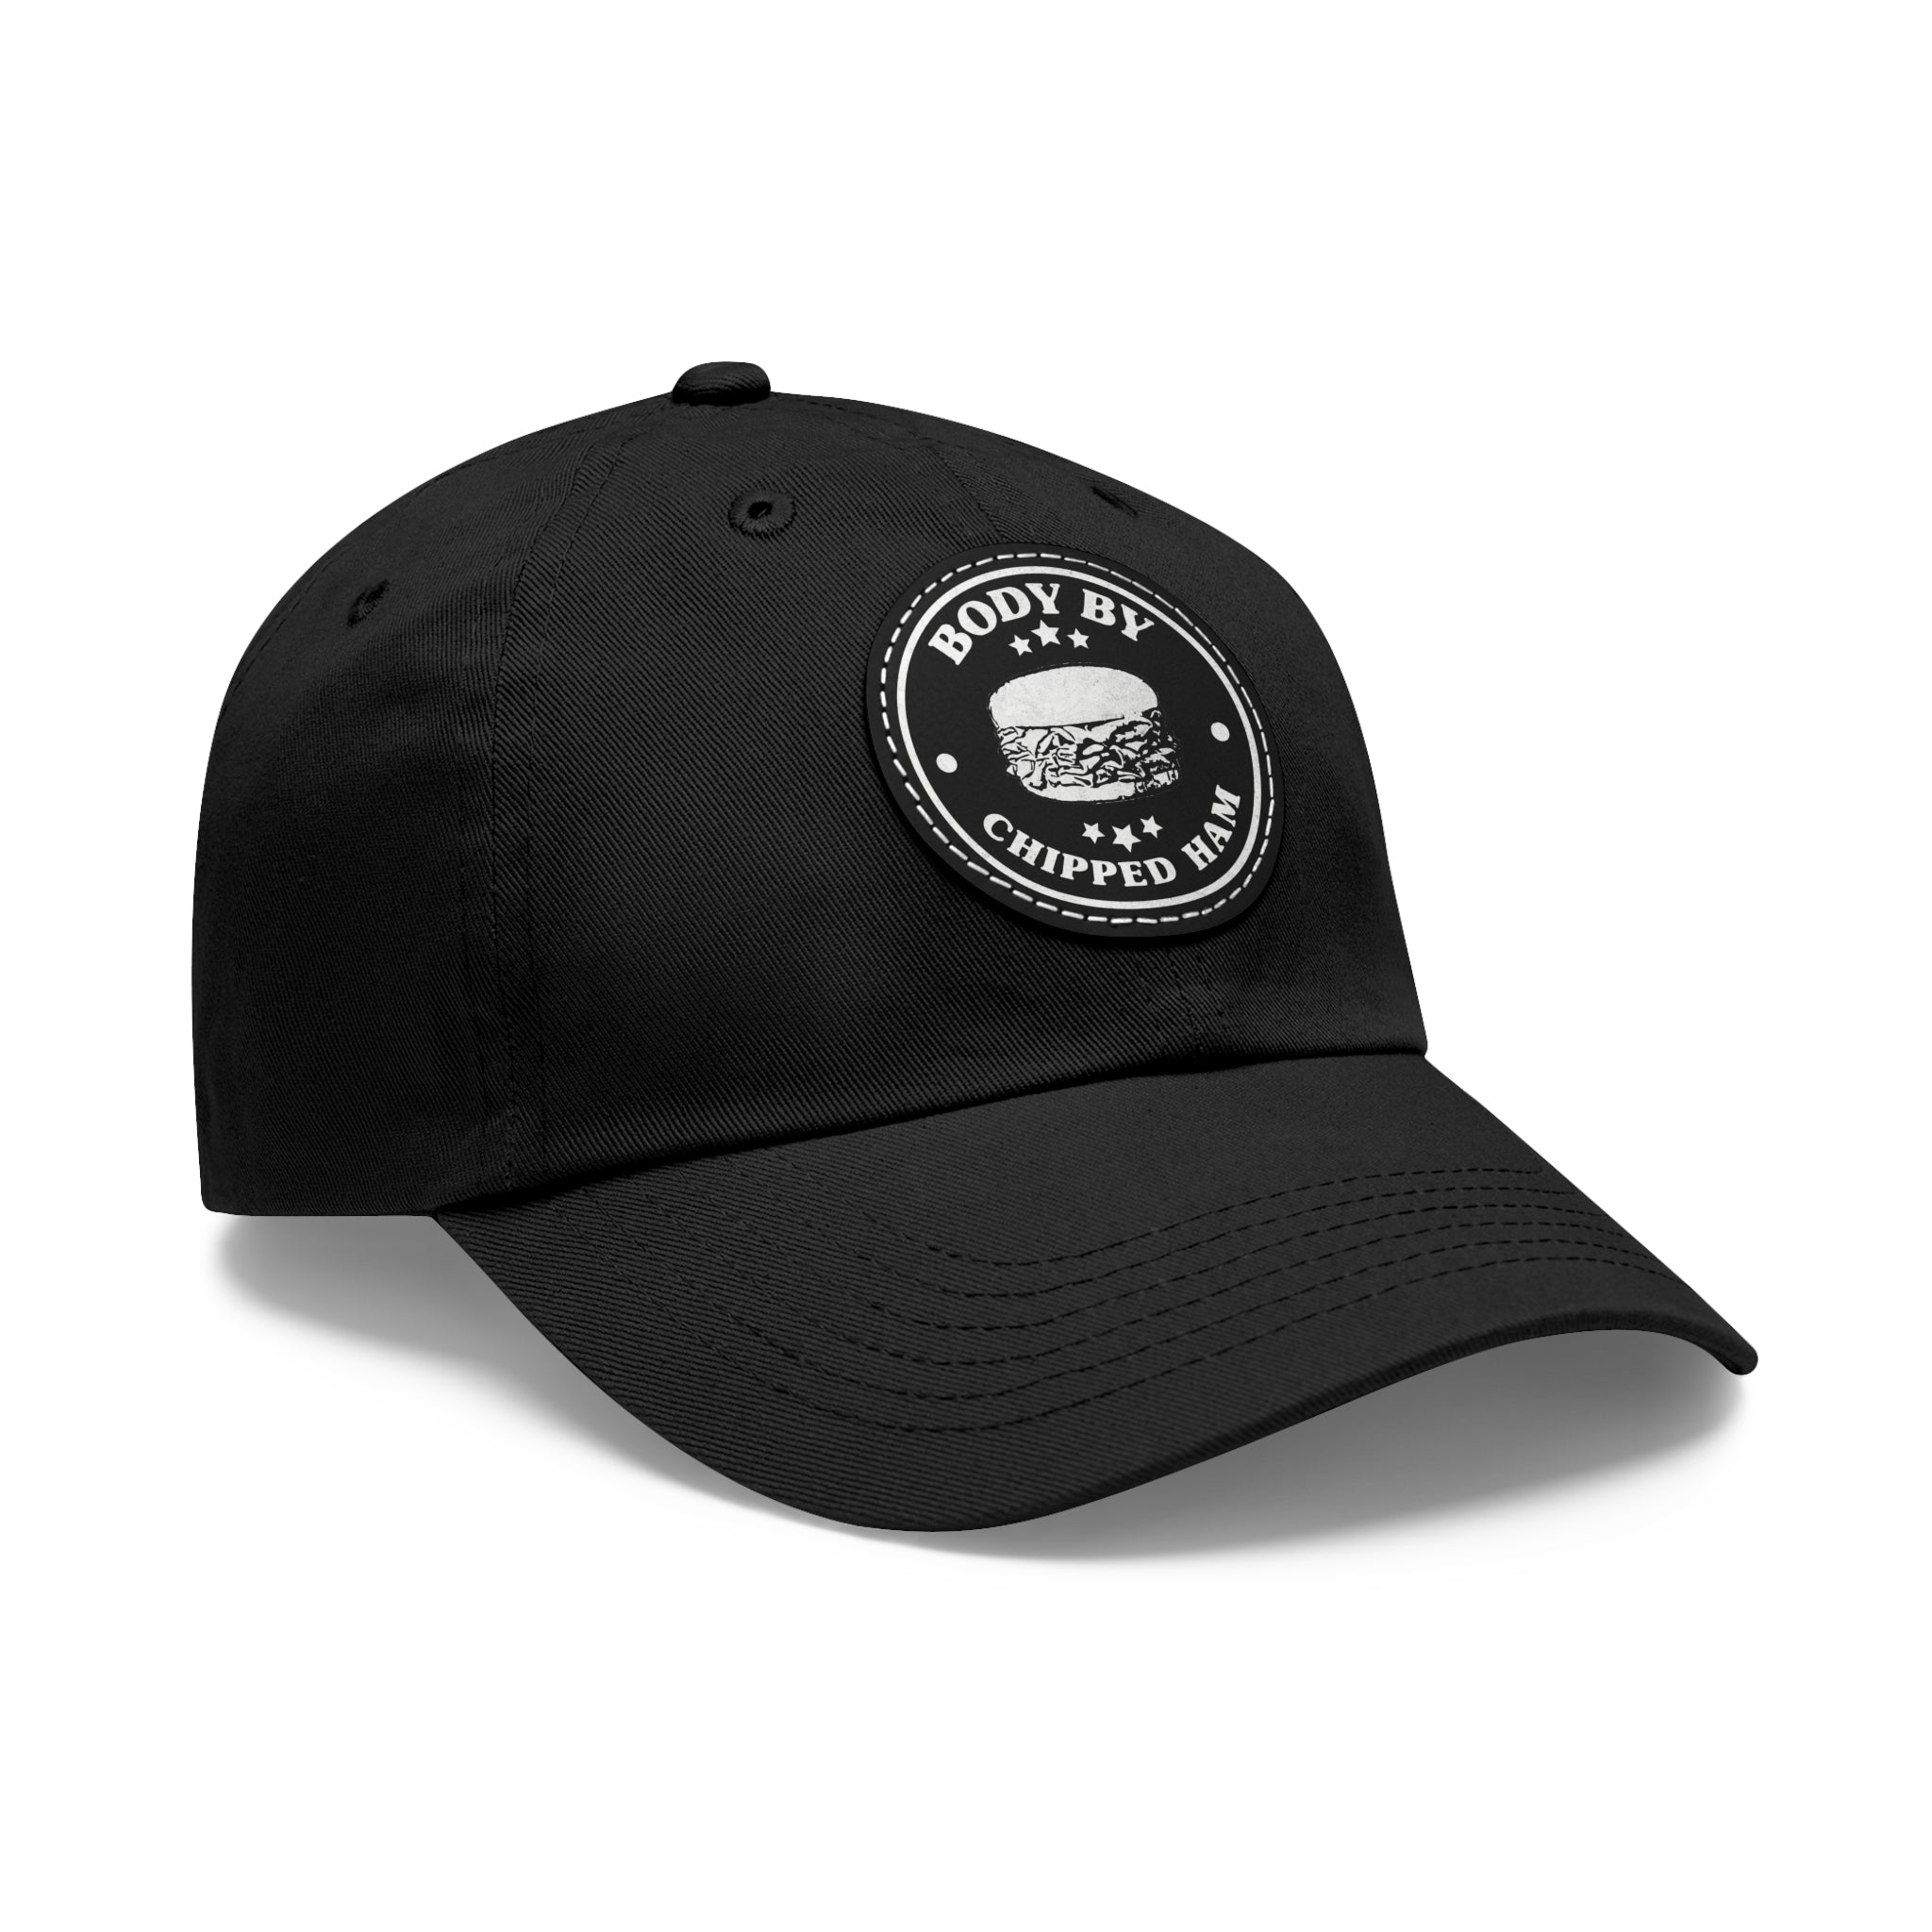 Body by Chipped Ham - Printed Patch Dad Hat - Yinzylvania